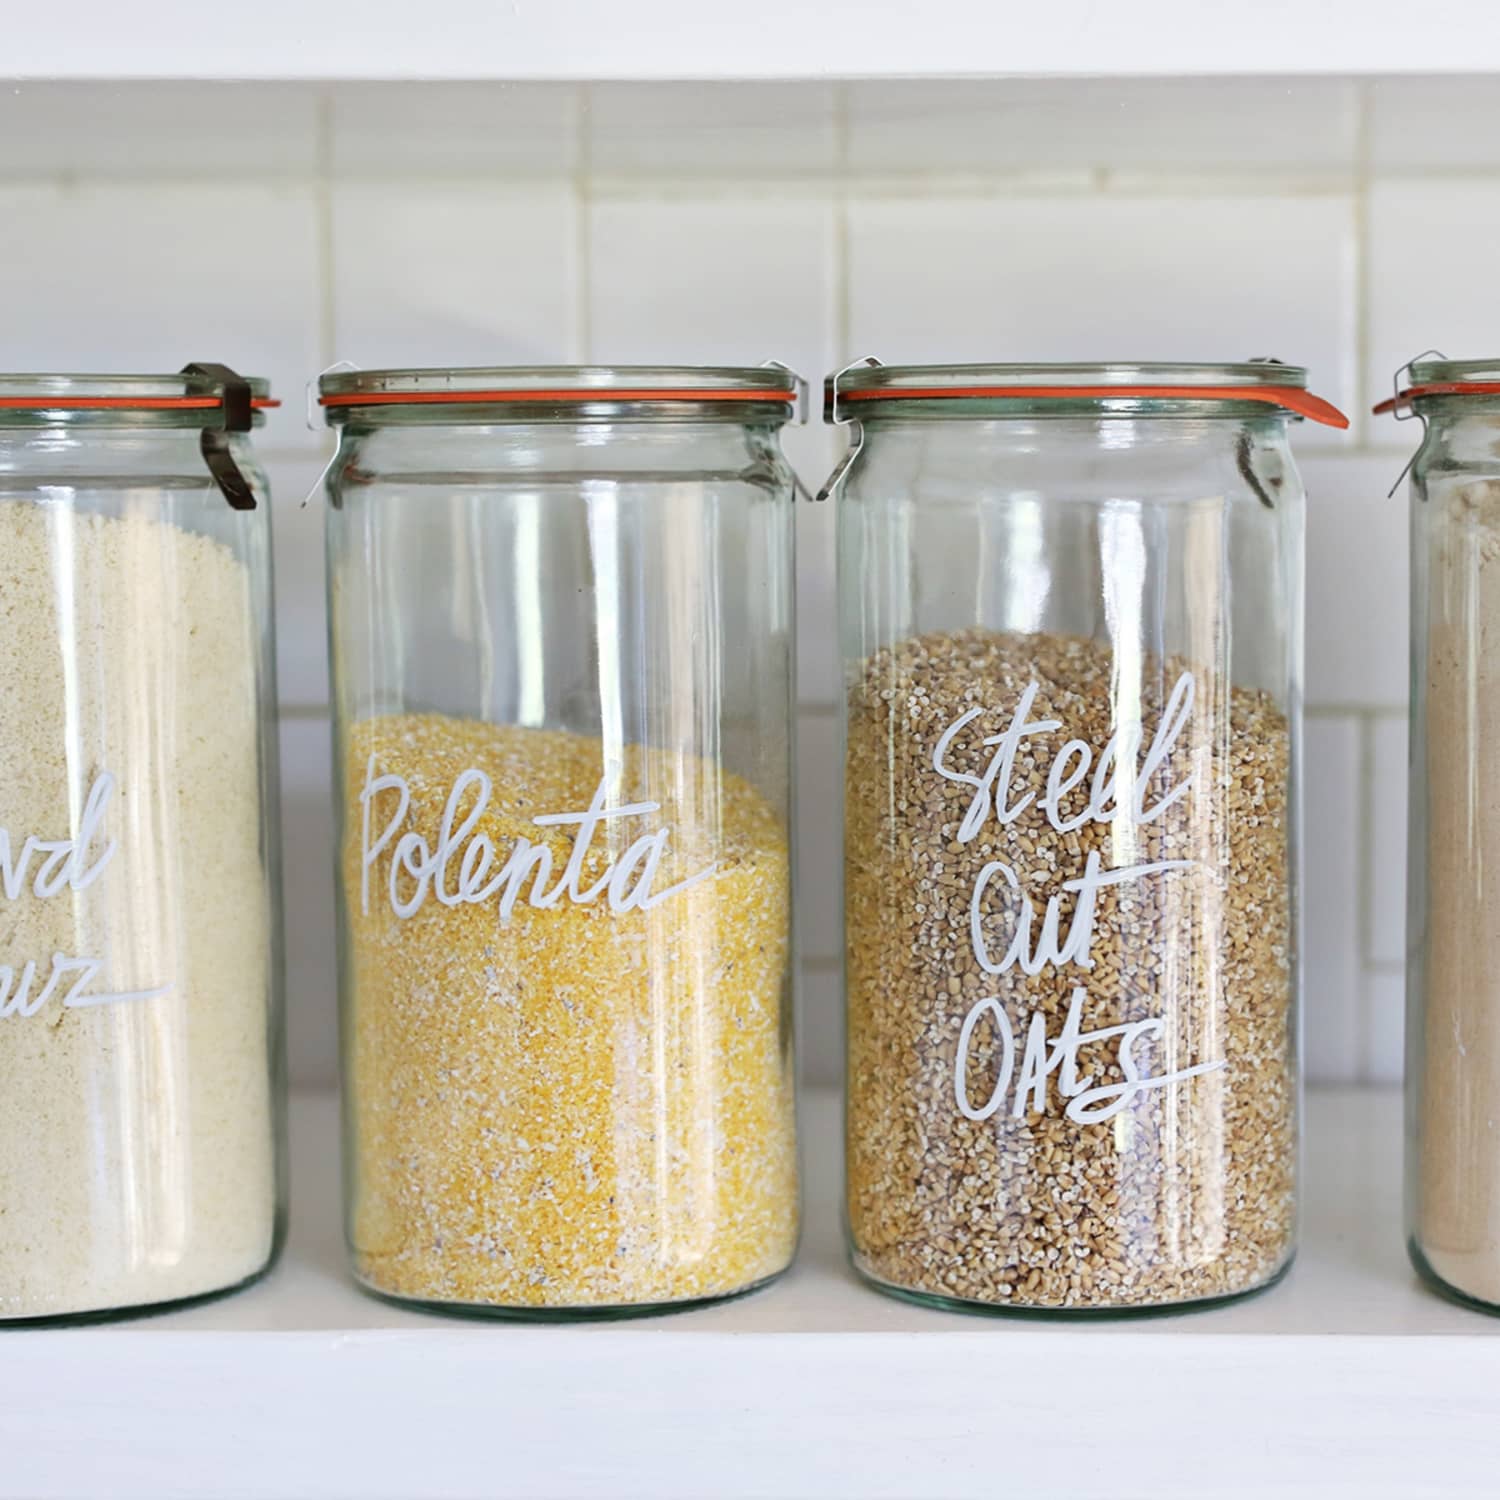 Best Label Maker for Home Organization - Life with Less Mess